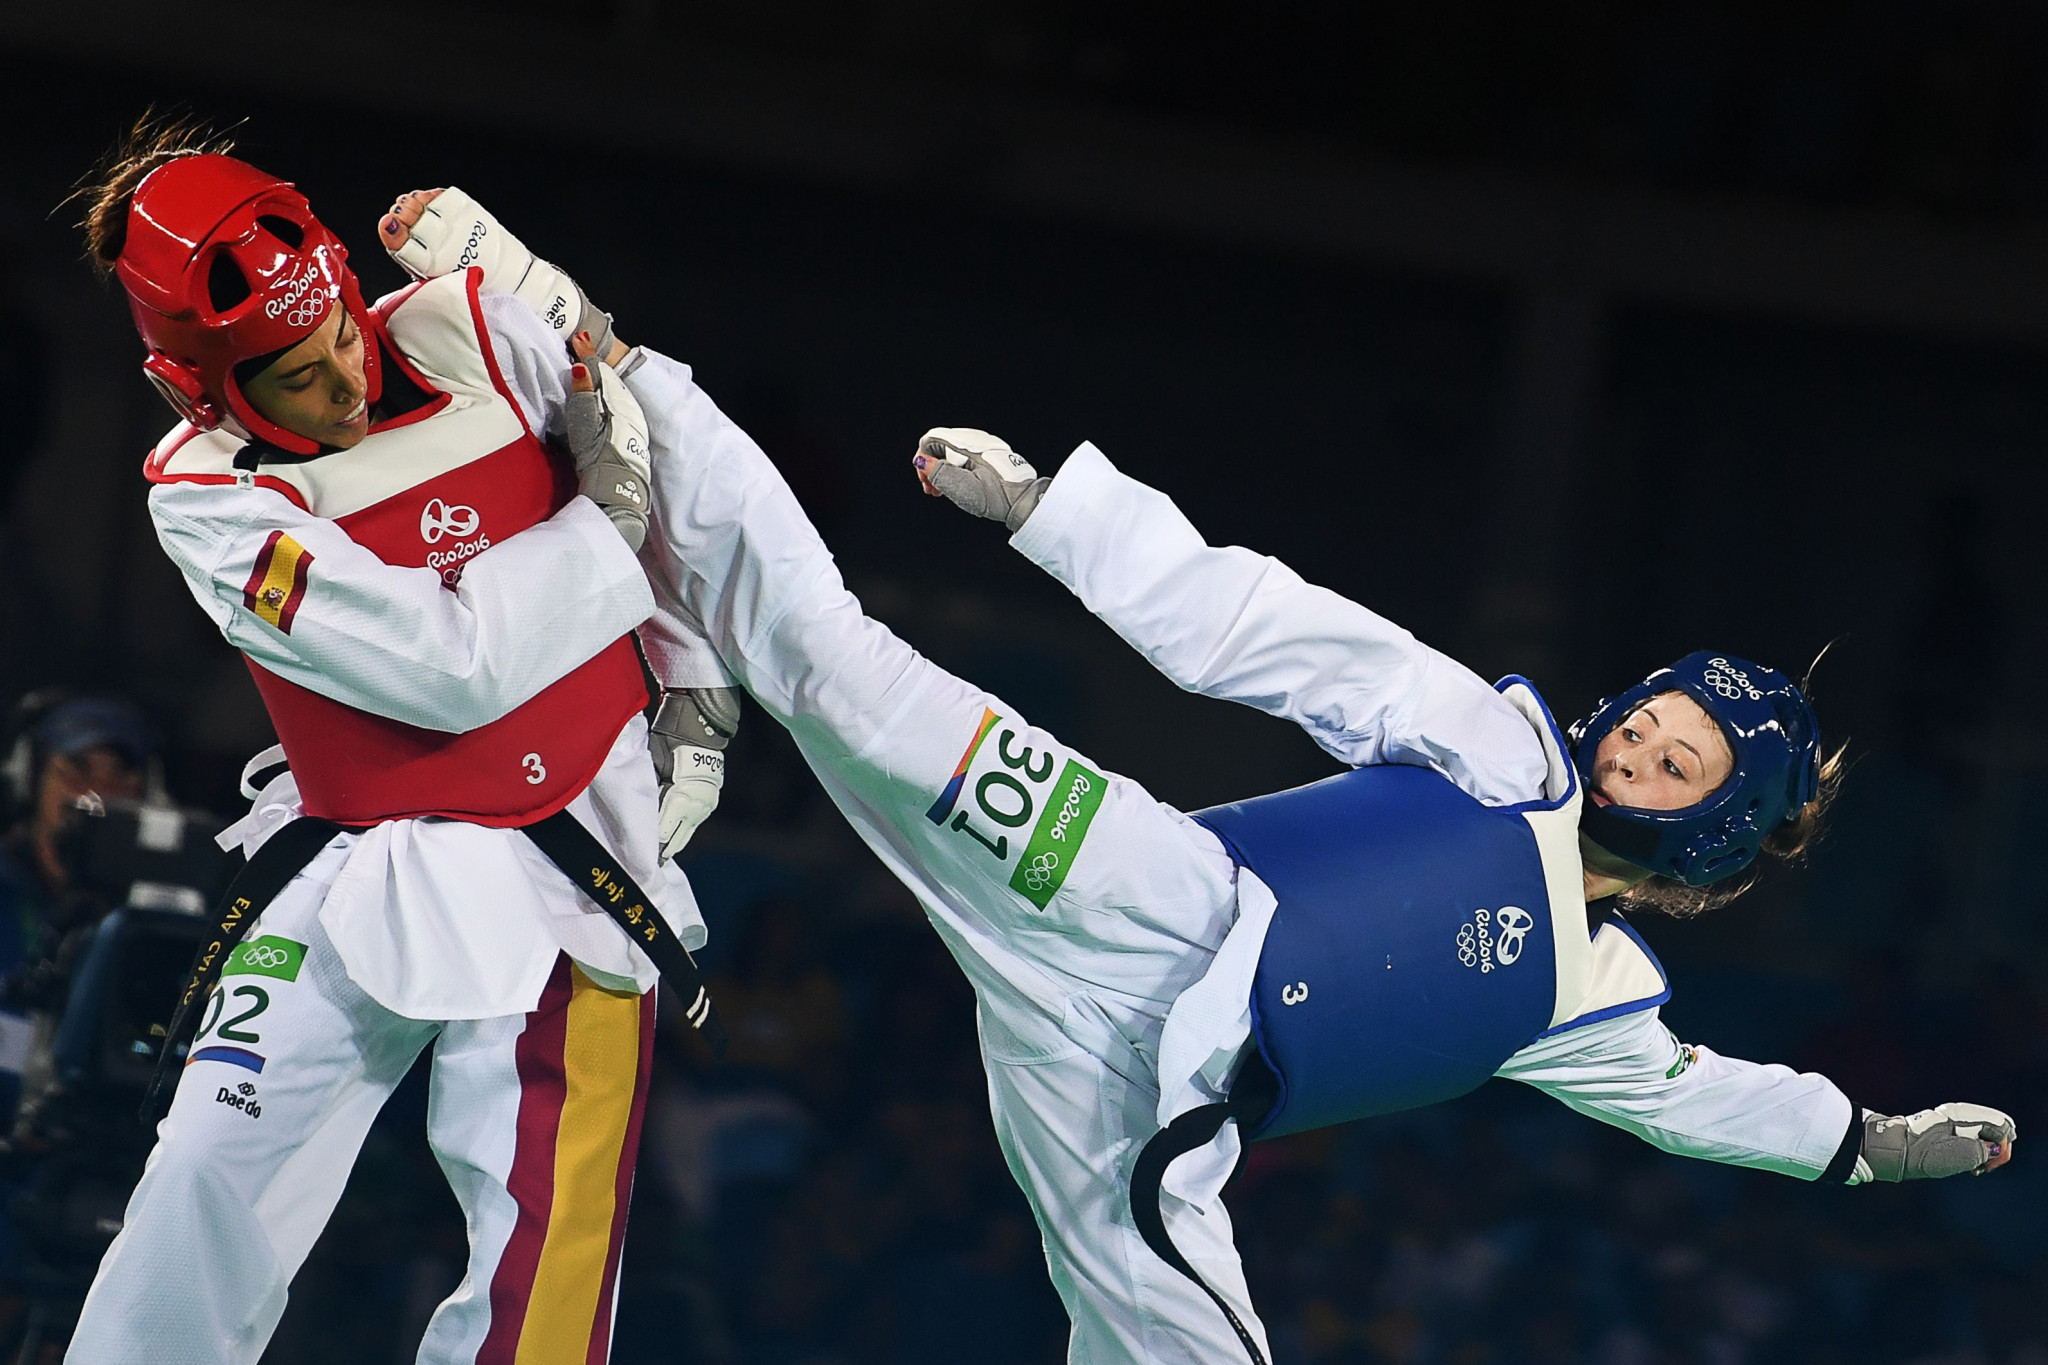 World Taekwondo Europe aims to provide the best climate for its athletes to reach their ultimate goal; winning gold medals at the Olympic Games ©Getty Images